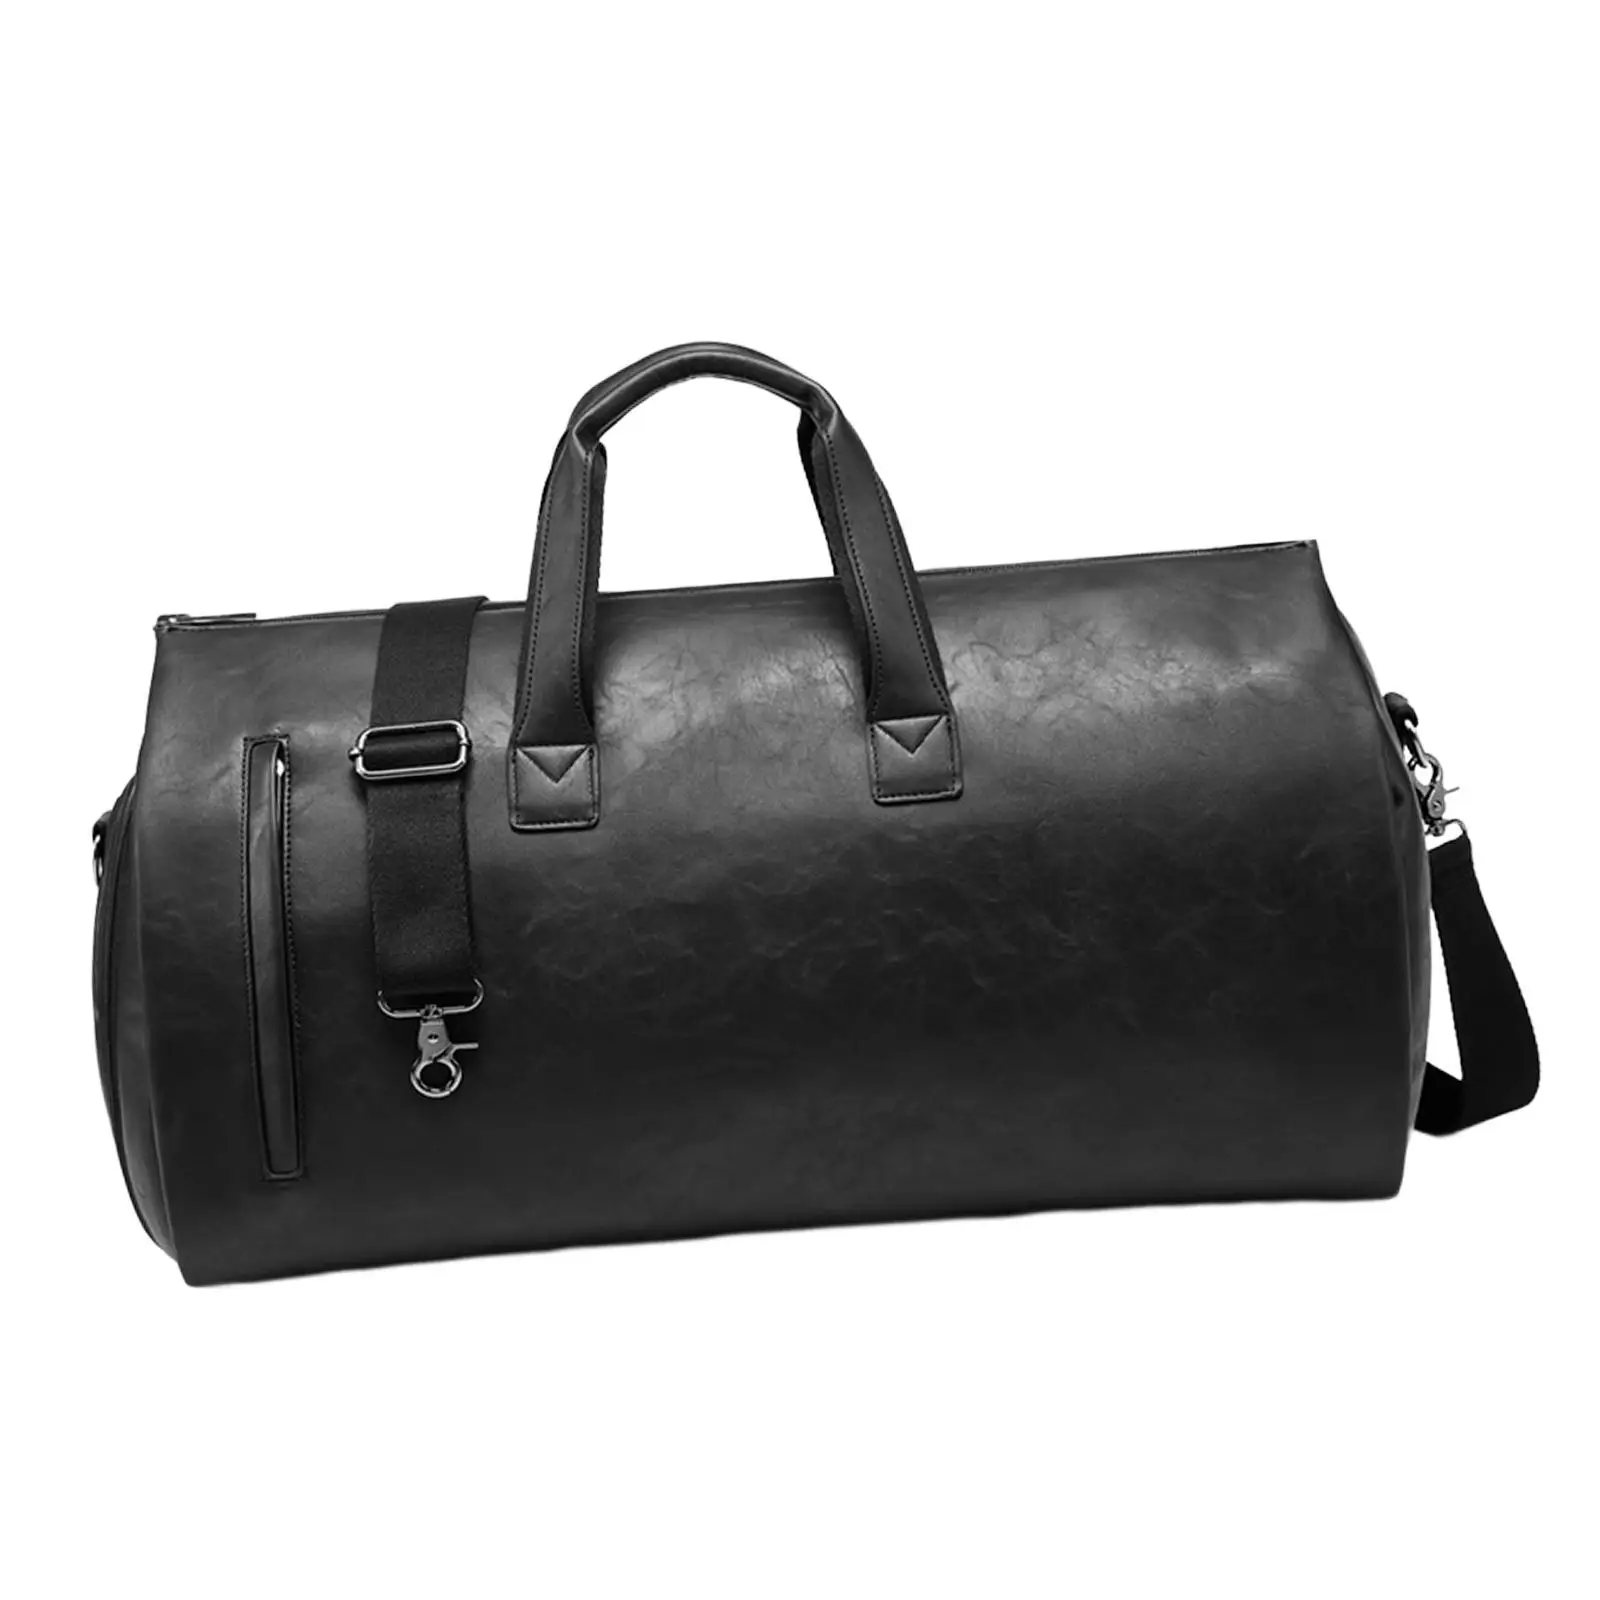 Leather Duffle Bag for Men Women Large Capacity Multipurpose Water Resistant Carry on Bag with Shoes Compartment for Camping